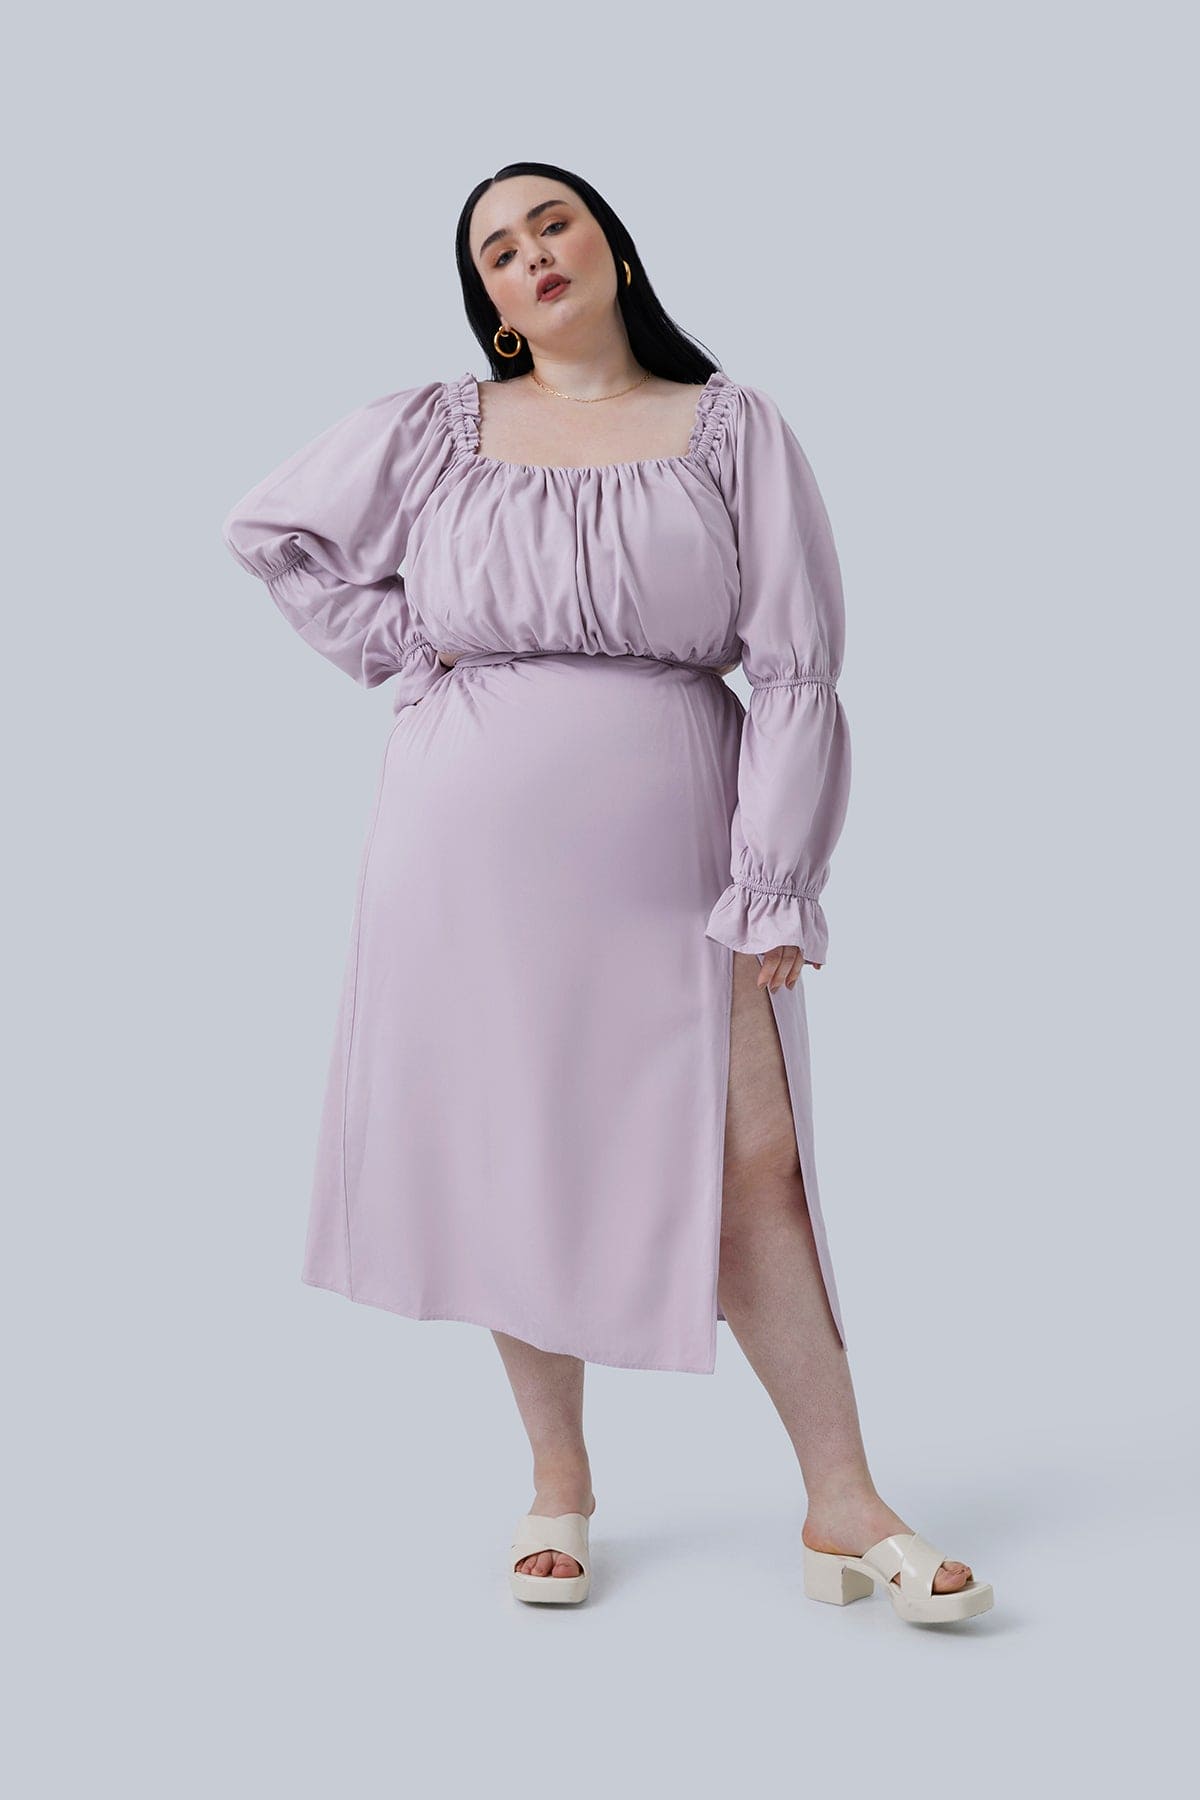 The Gia top in lilac size 3X by Gia IRL Plus Size Boutique. Model is standing with one foot out and one hand on hip, head tilted to the side. You can see the ruched detail and blouson sleeves. The plus size fashion for women you want to shop.